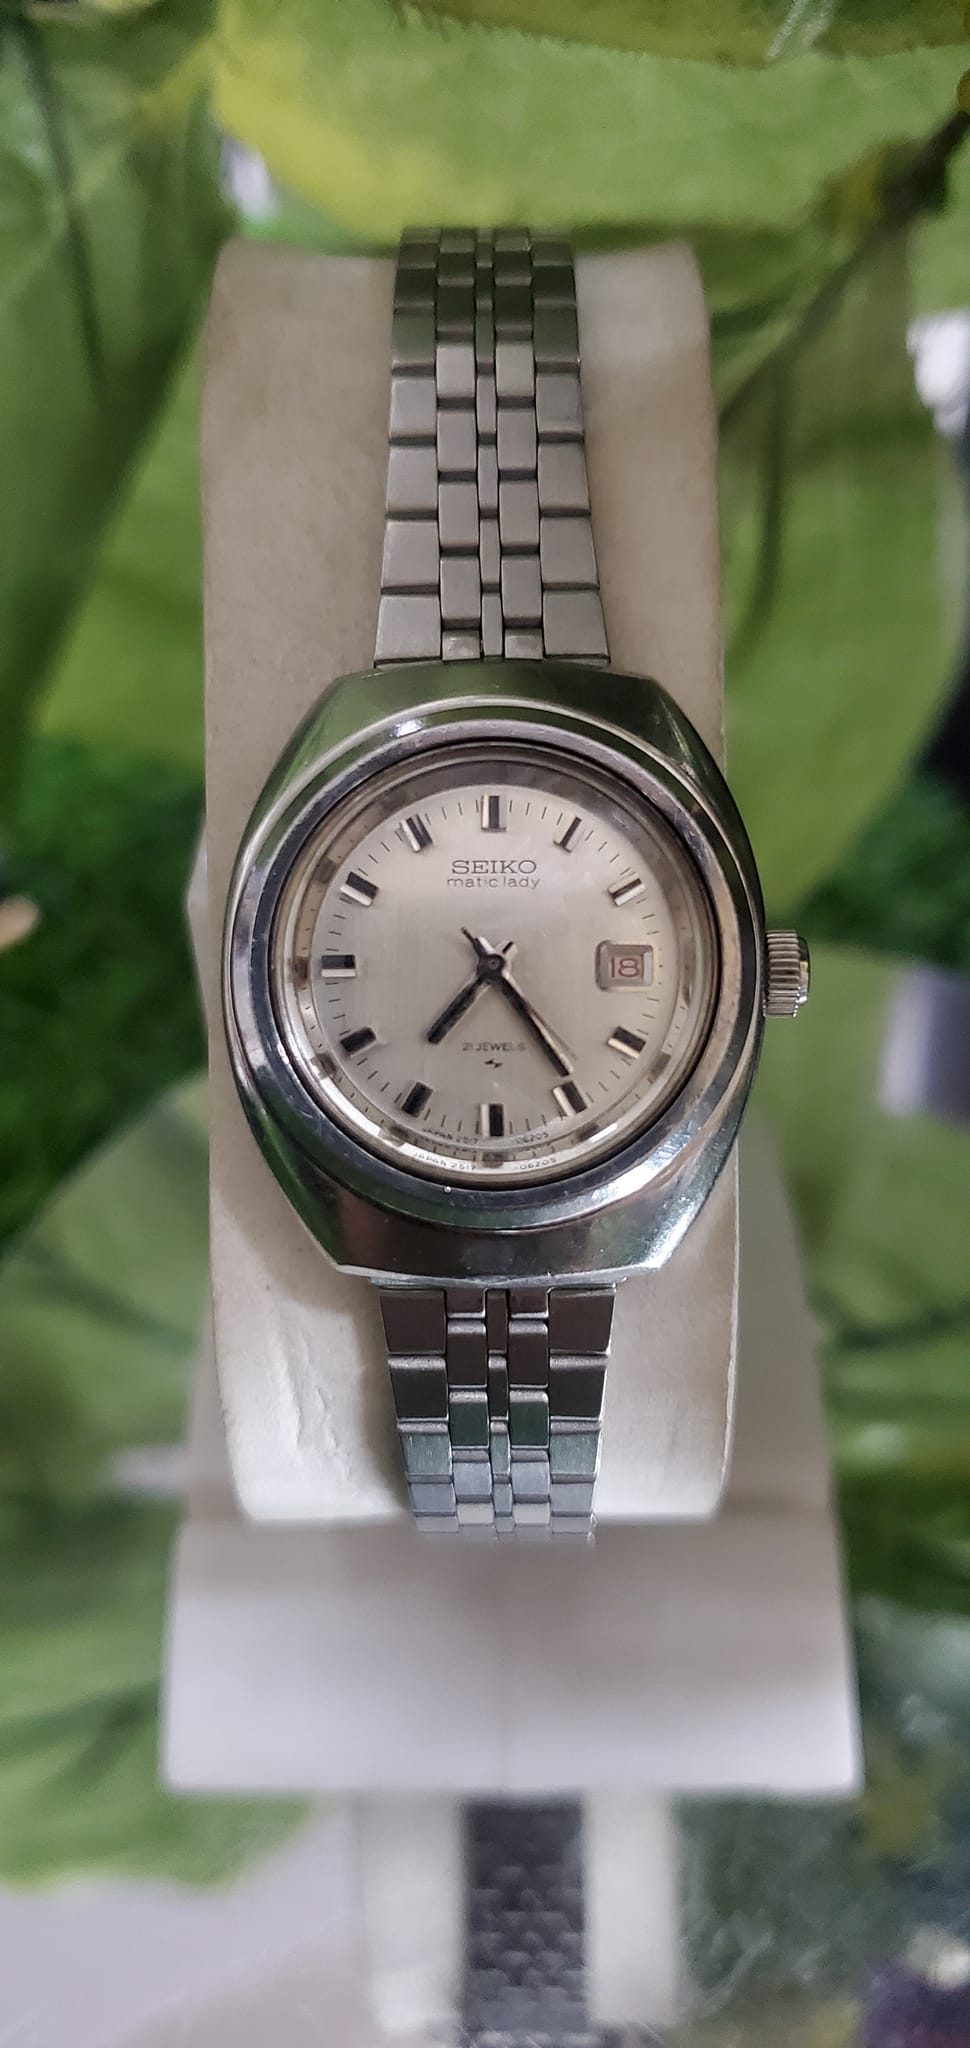 Rare and vintage Seiko Matic lady Handwind 2-jewel Japan made watch for Ladies in mint condition